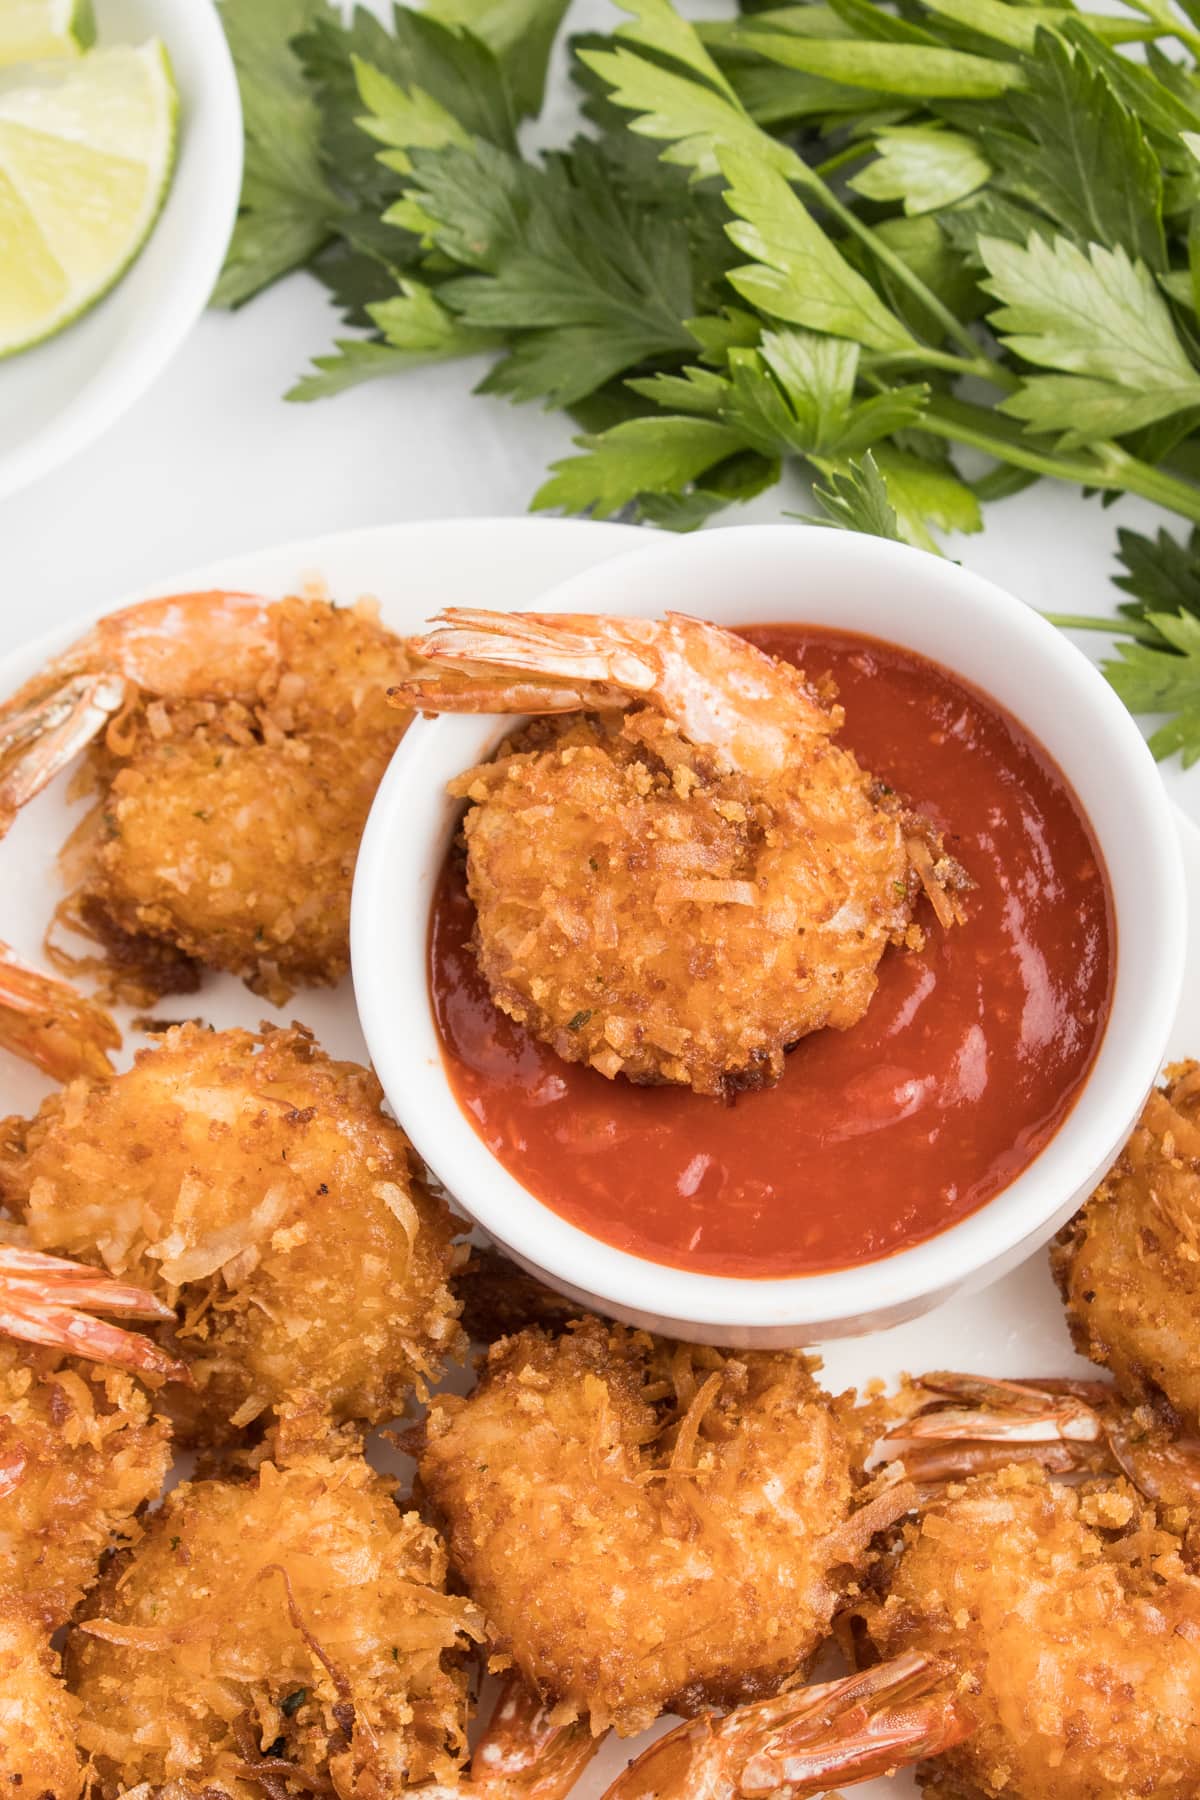 A coconut shrimp dipped into a dish of sauce